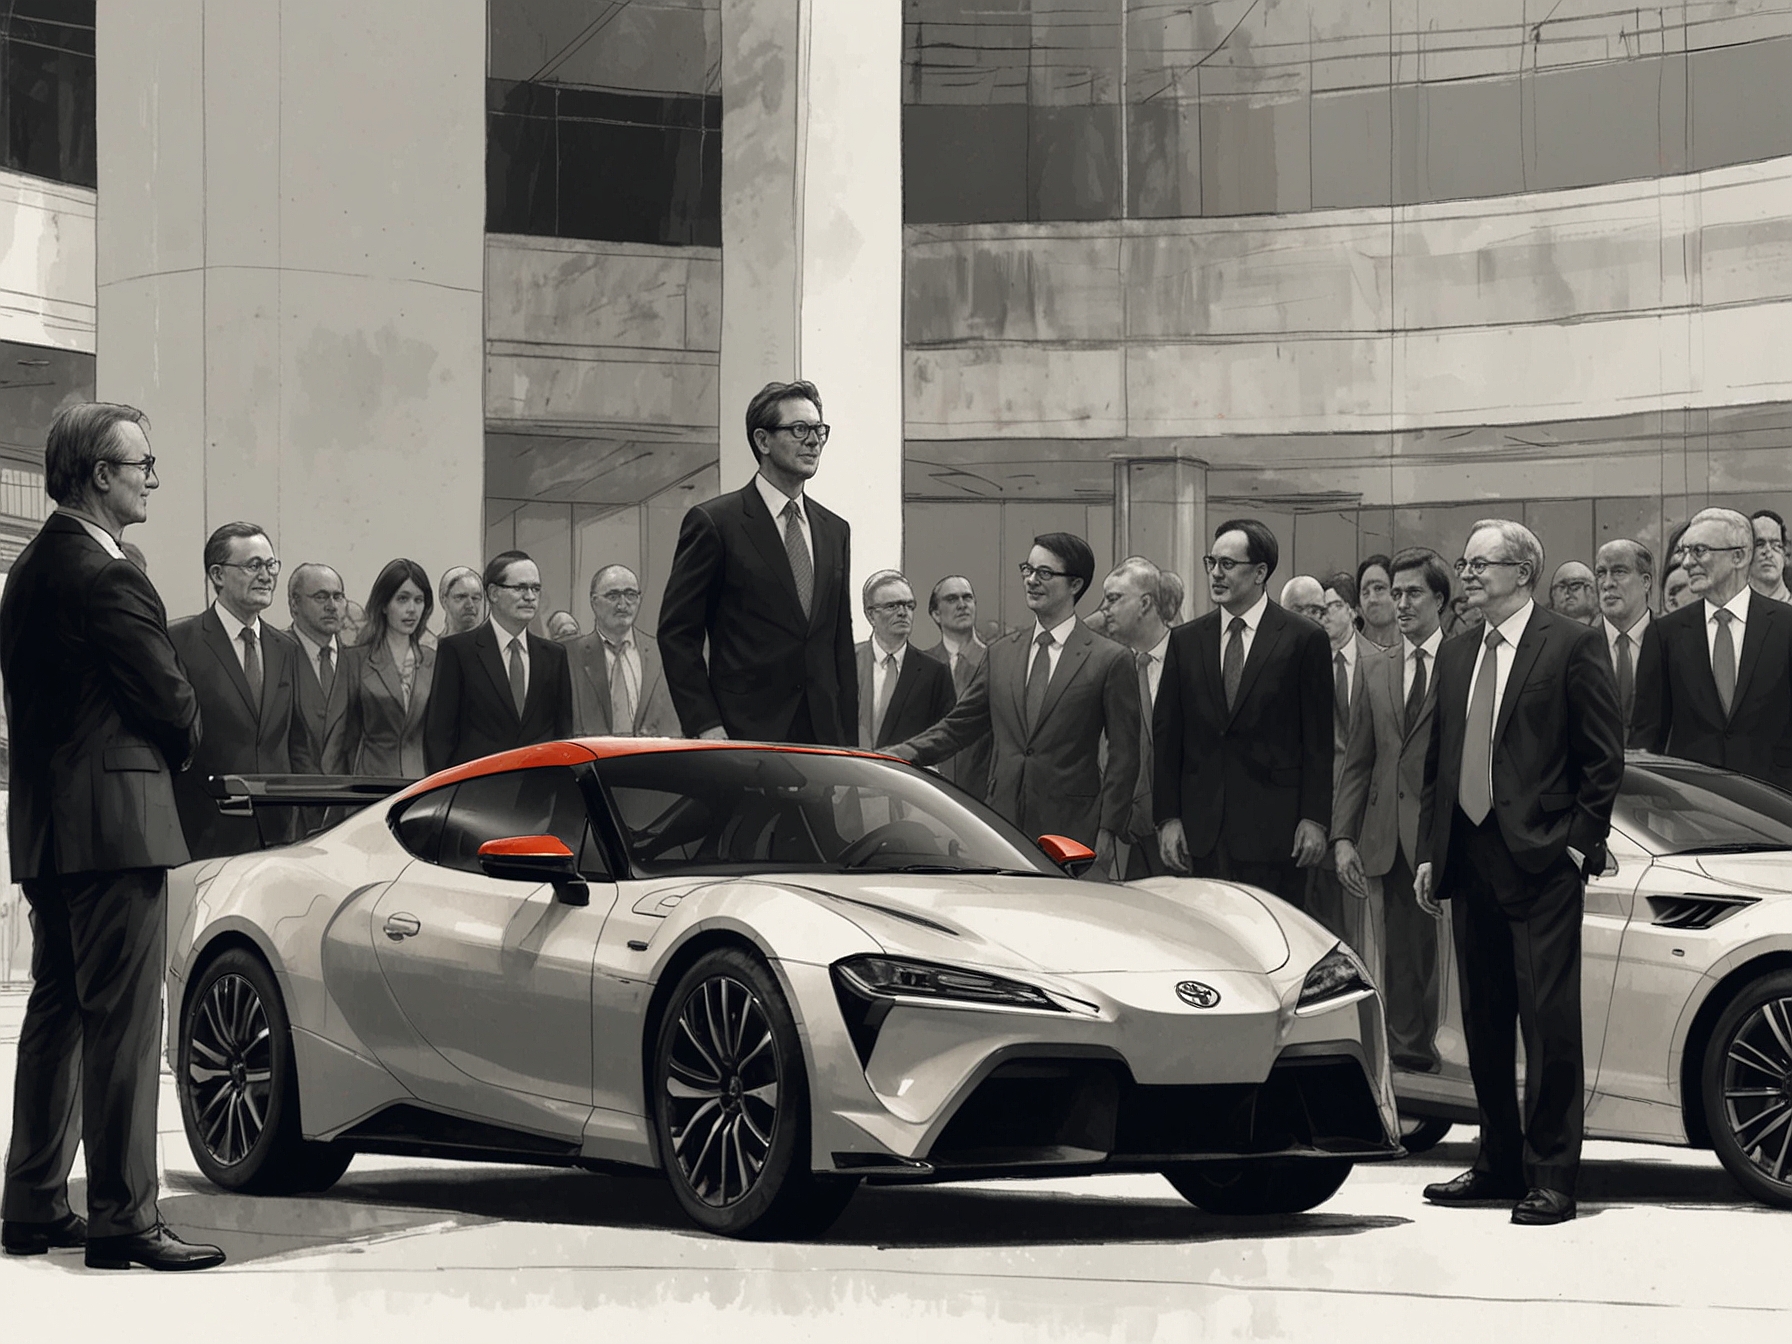 Illustration of Toyota's AGM showcasing the diverse stakeholders, with international and domestic investors debating over the company's EV strategies and governance practices.